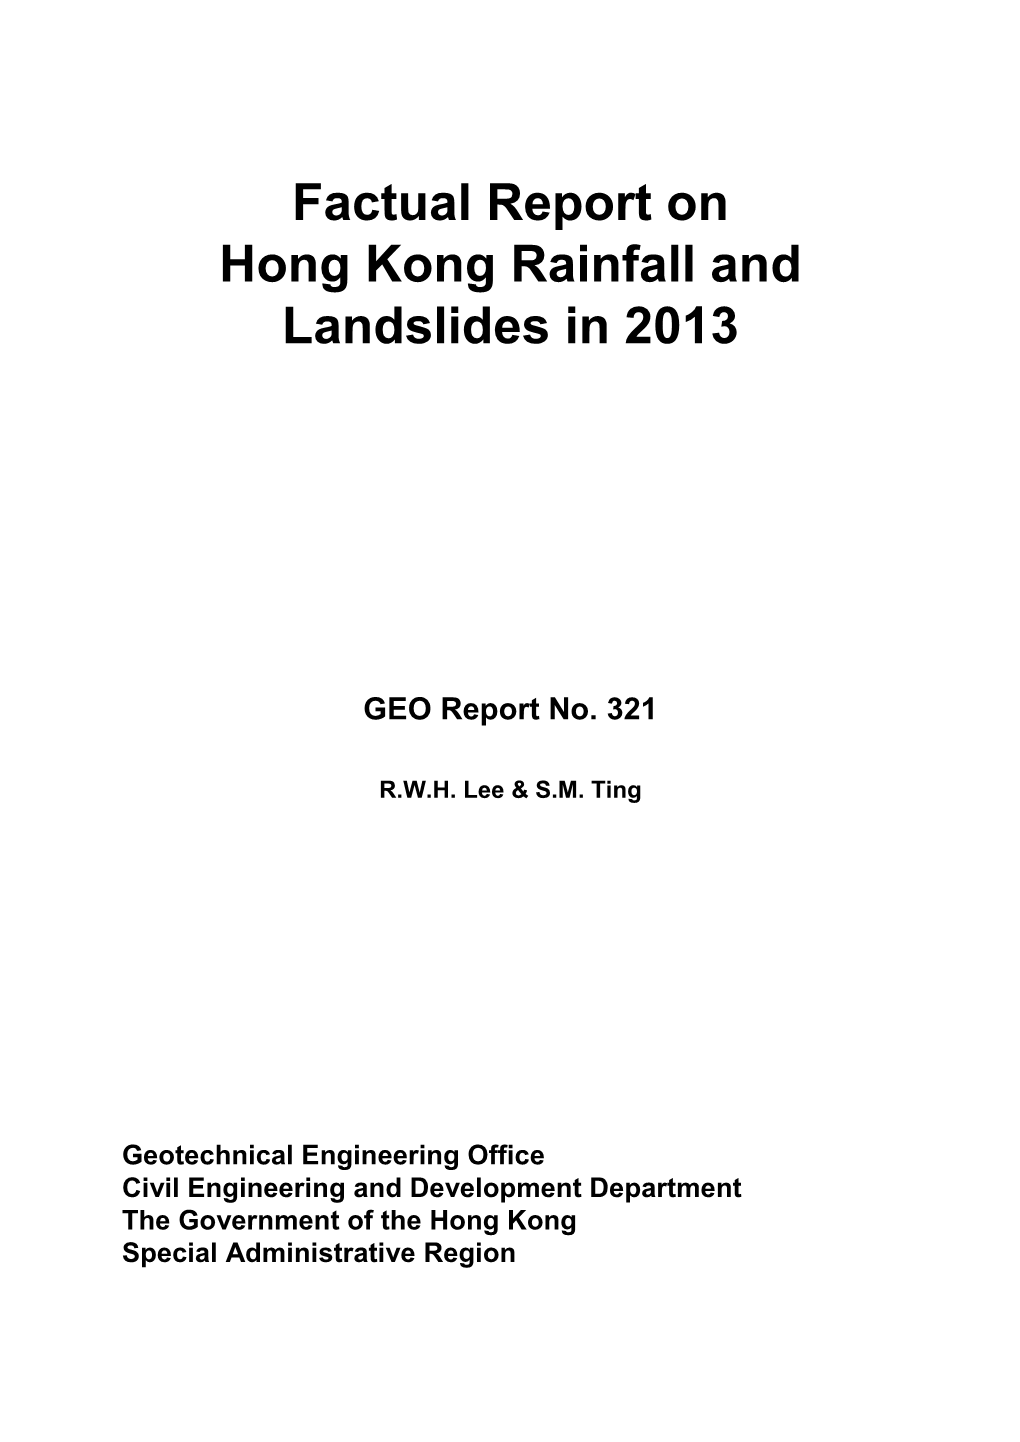 Factual Report on Hong Kong Rainfall and Landslides in 2013